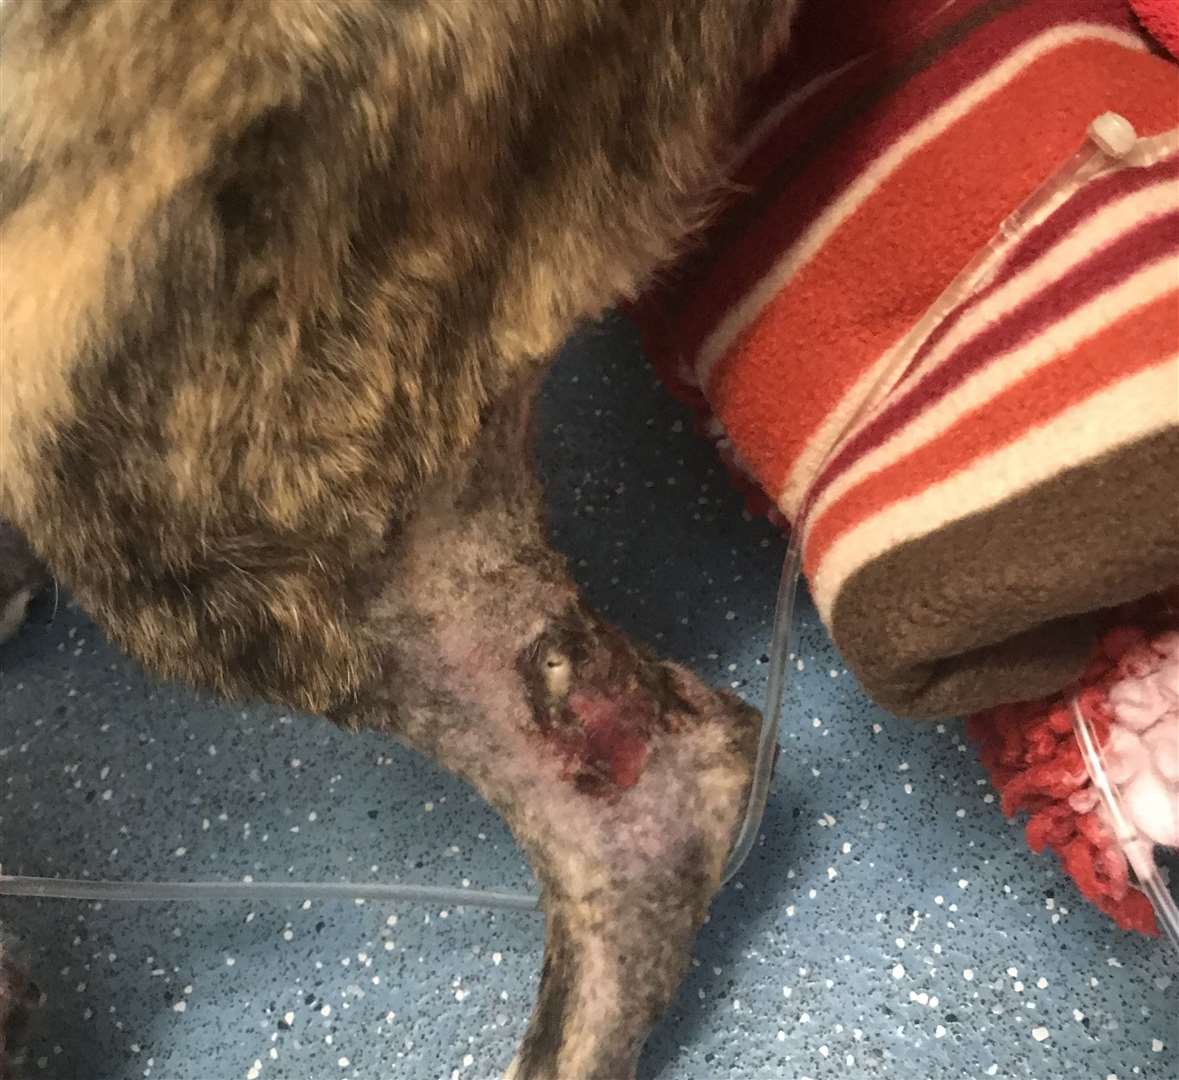 The dog's leg may need to be amputated. Picture: RSPCA